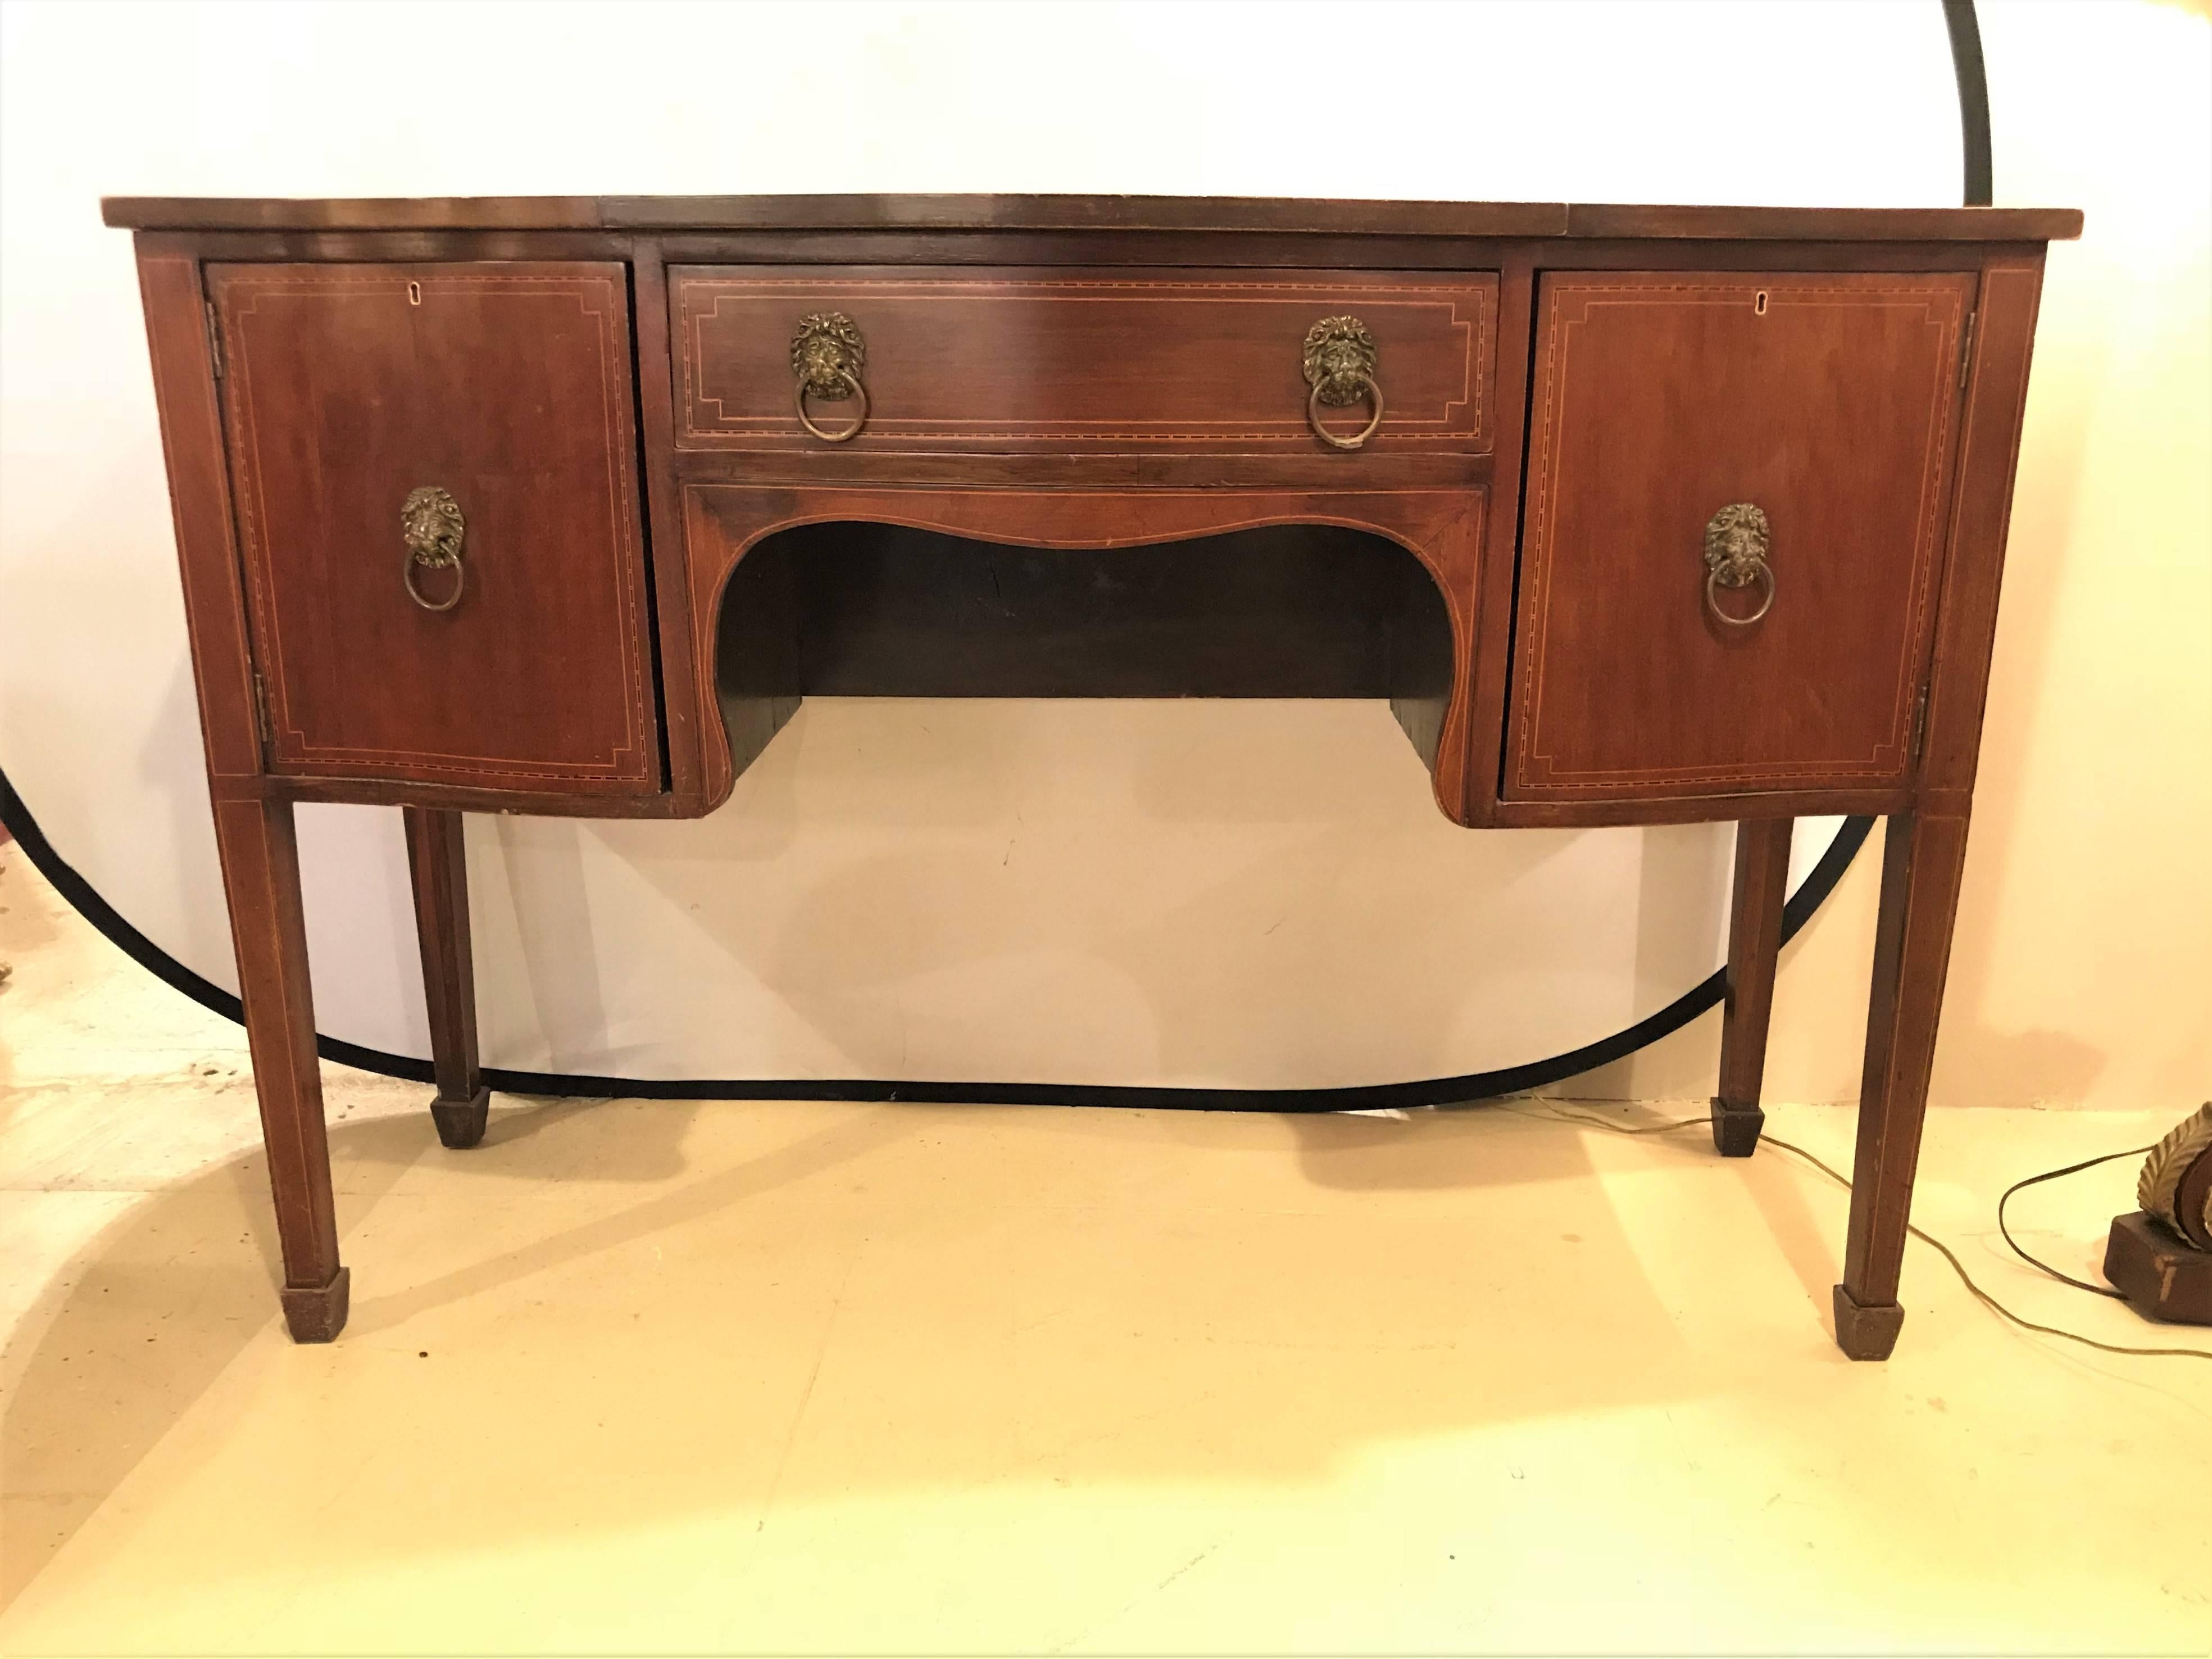 A 19th century Georgian style sideboard or server with inlays. This sideboard or server has a centre drawer flanked by two doors, one having a fitted drawer inside, all having lion head brass pulls. Fine line inlaid decorated. Recently hand rubbed